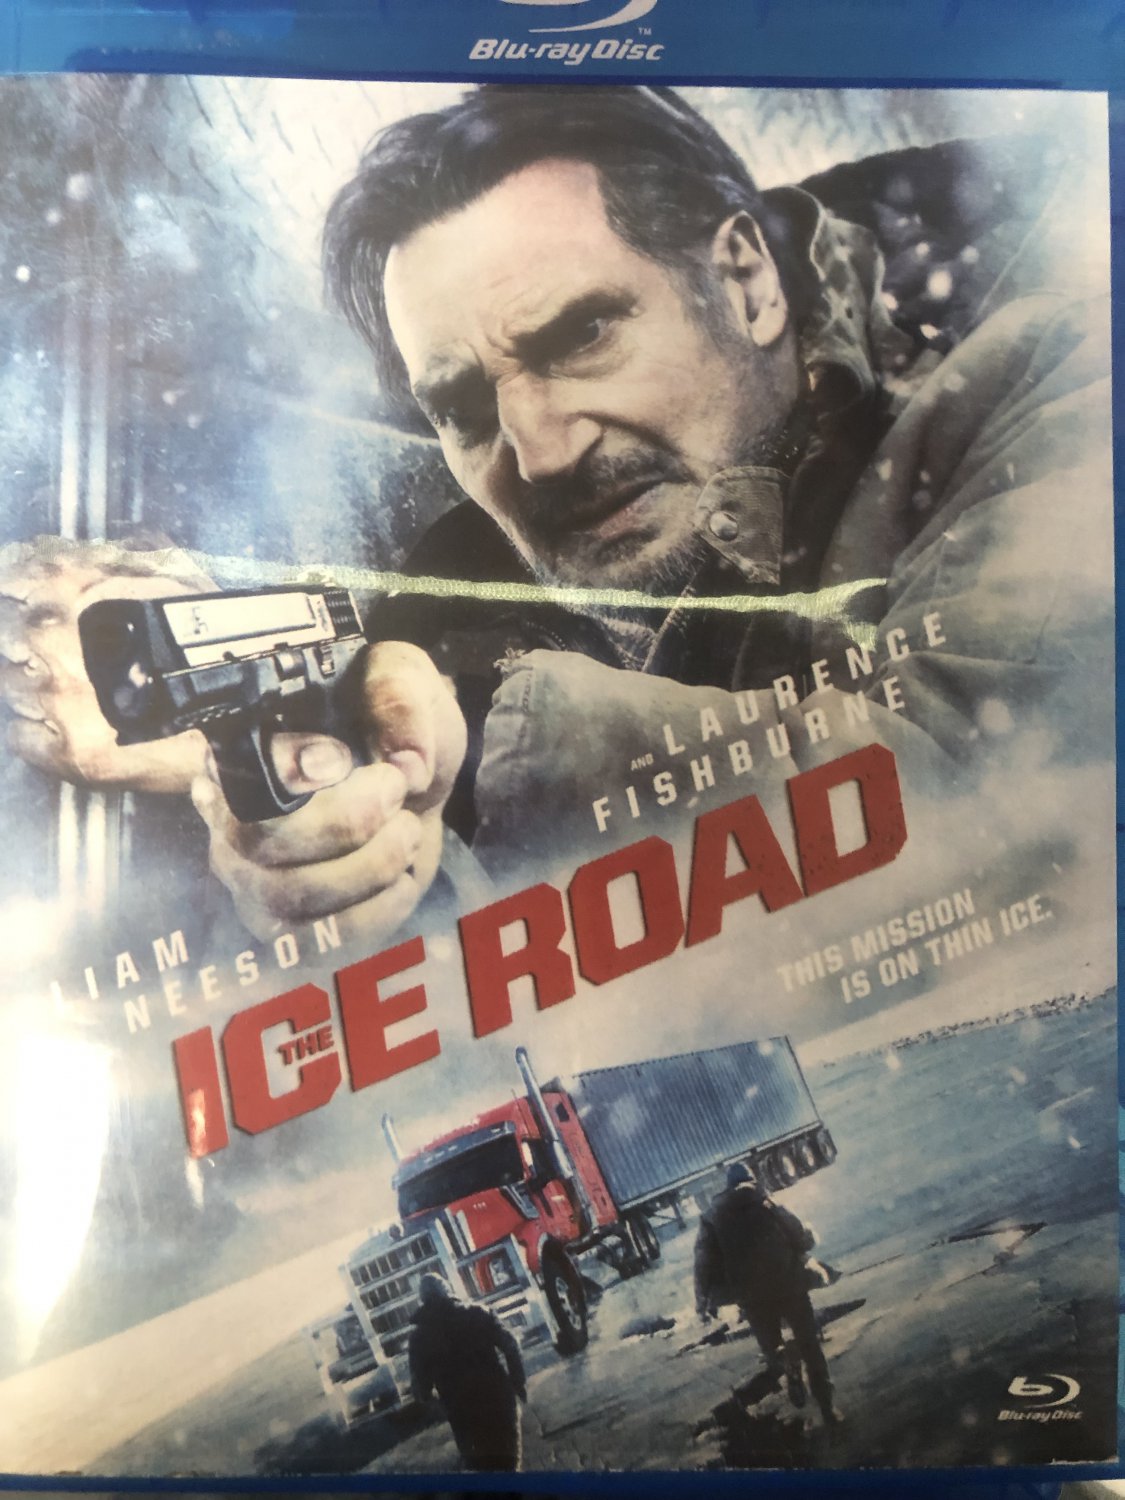 ice driver review